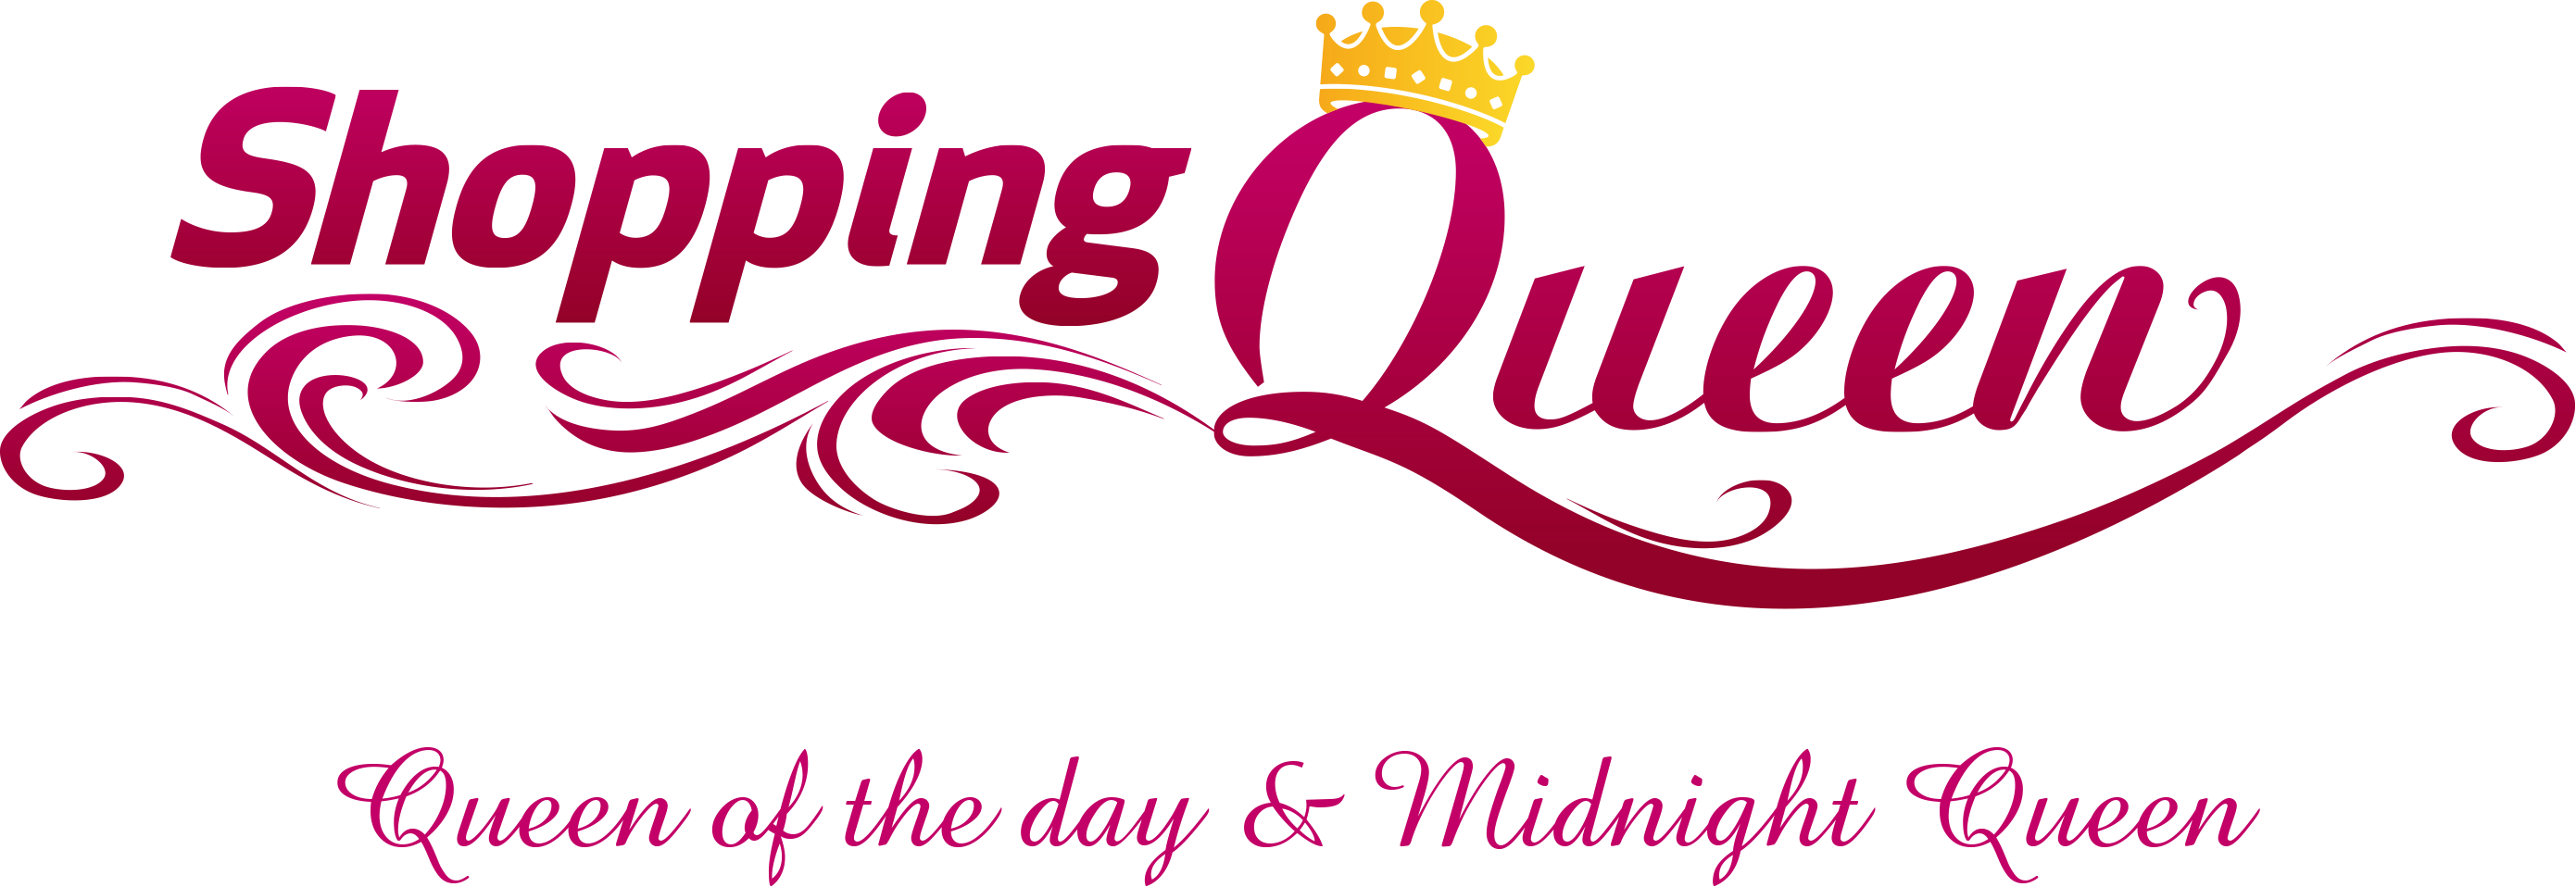 Related Shopping Queen Clipart - Wedding Special (deluxe Edition) Dvd (2781x958)